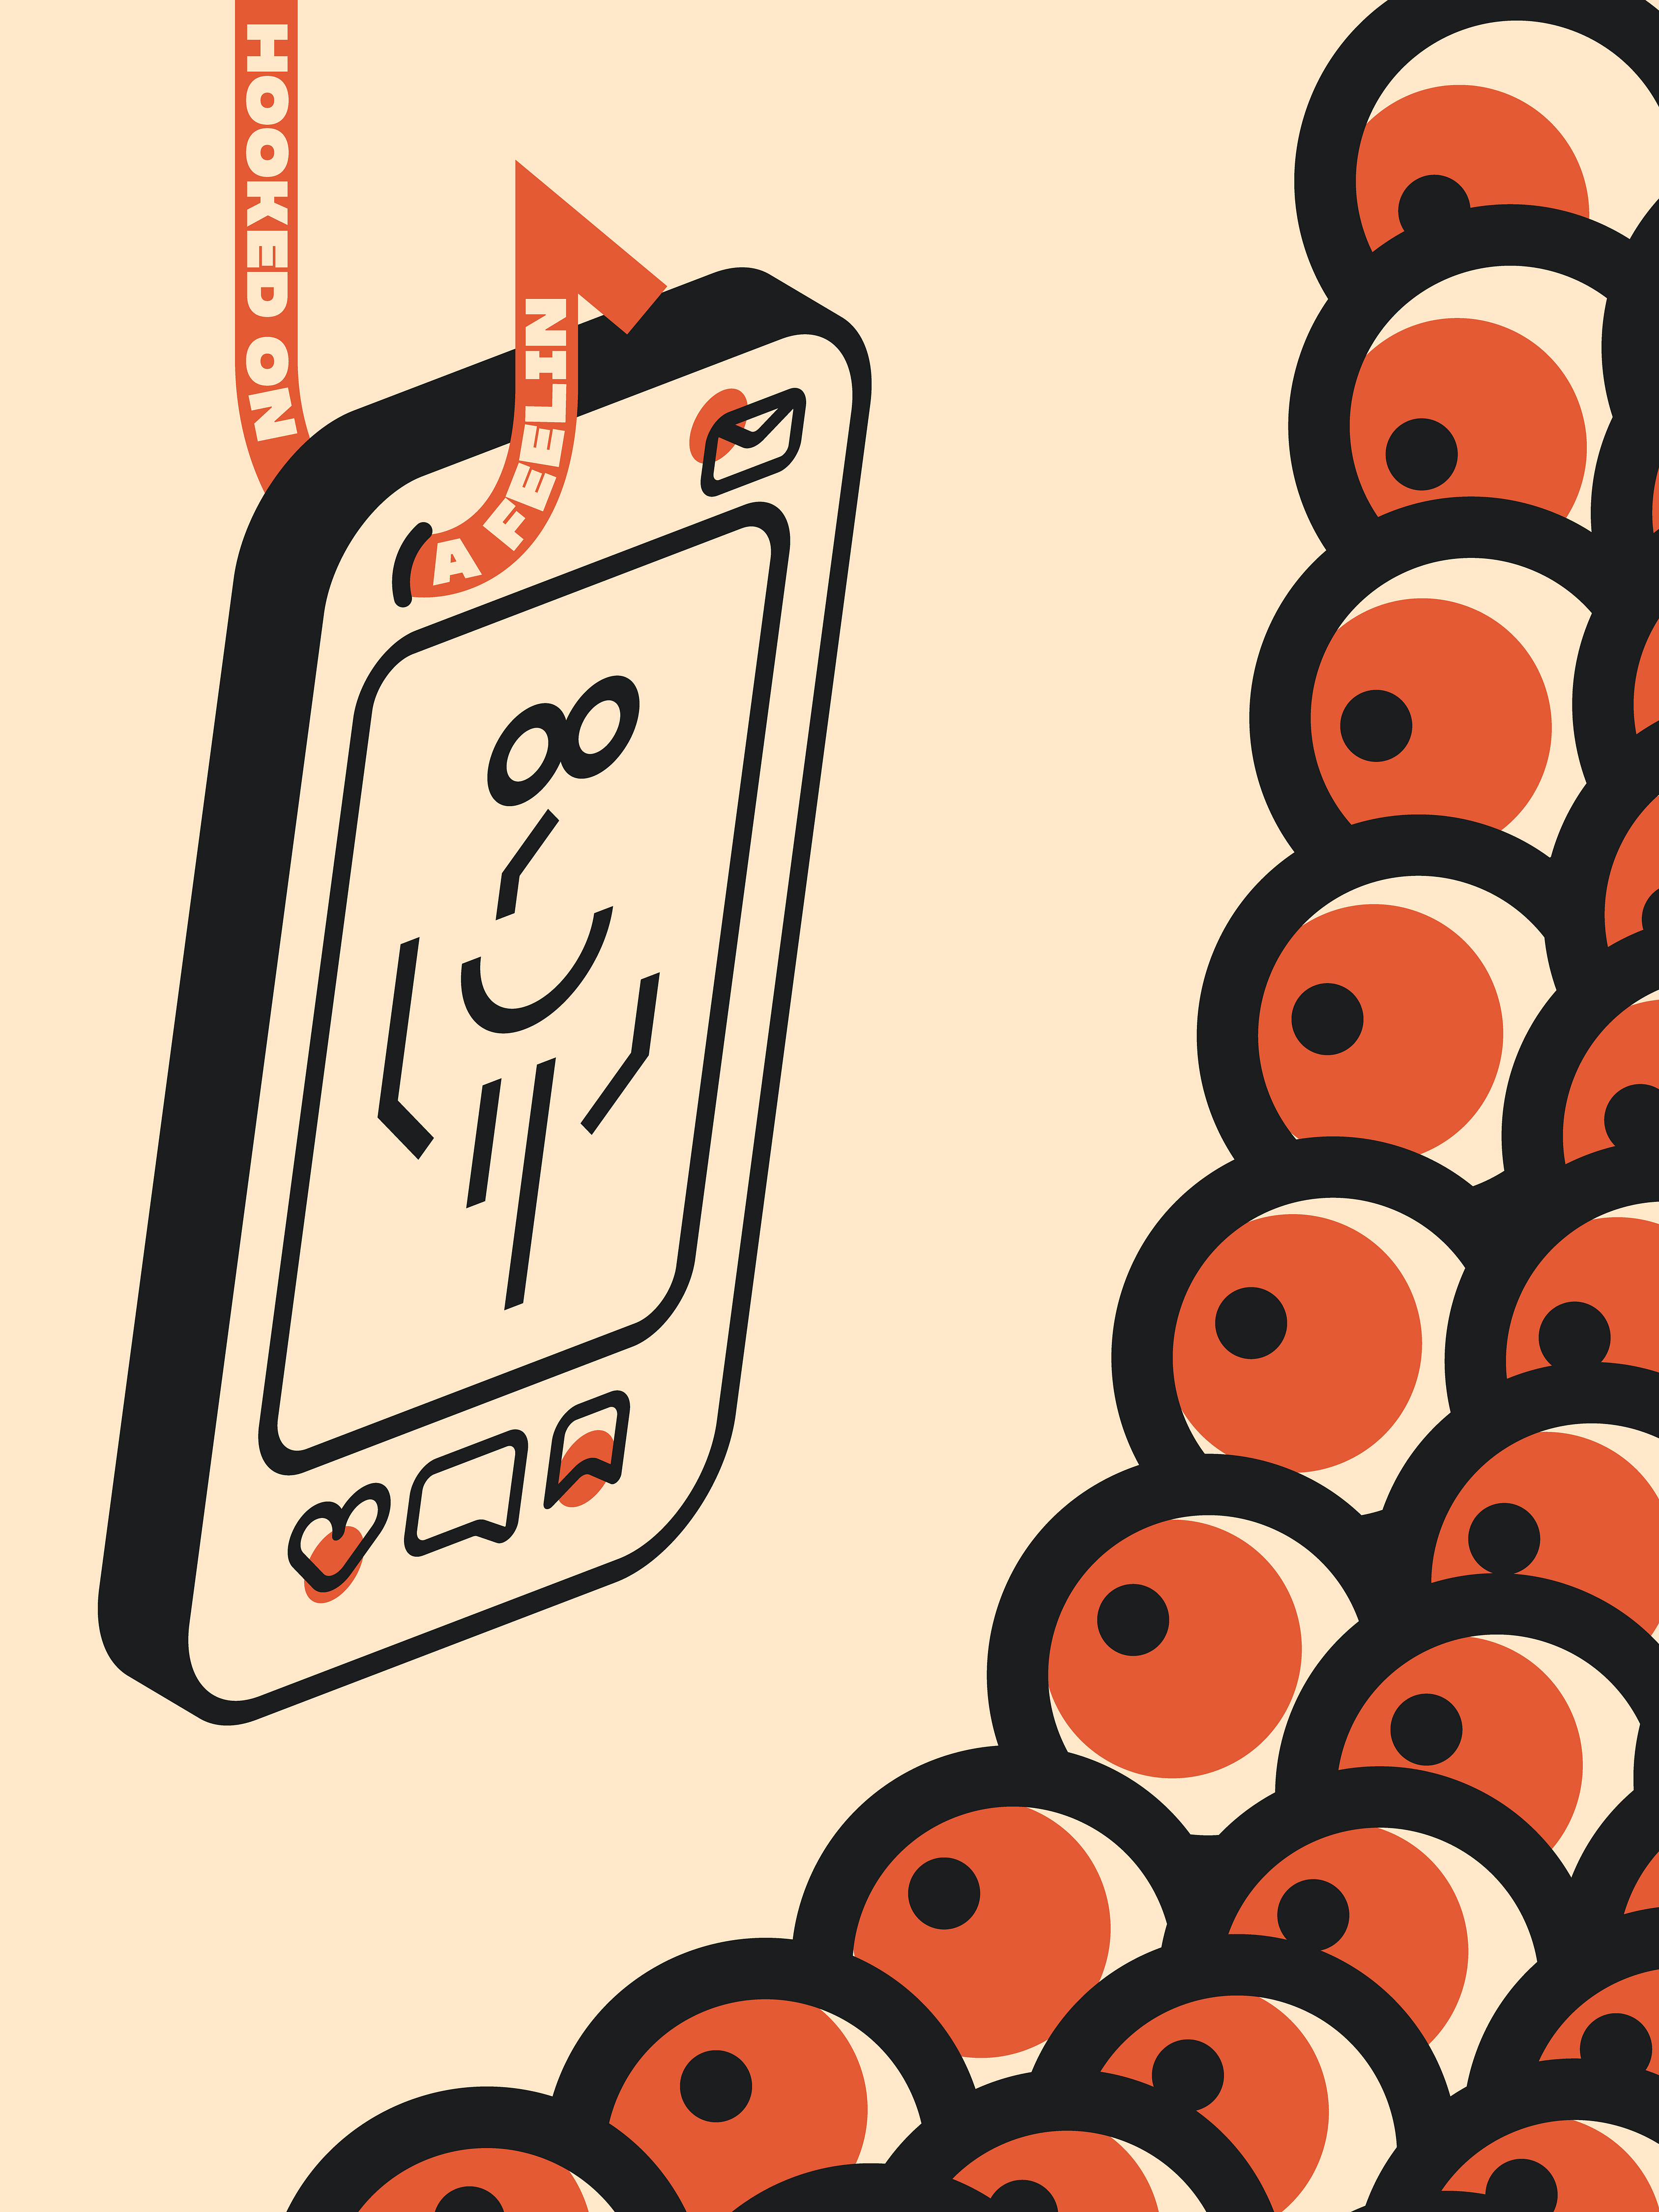 This poster is a social commentary on the feeling of receiving affirmation on social media platforms. The phone is hanging just out of distance from a hook called "Hooked on a Feelin." Teasing with the like button, bookmark, and inbox being pinged with notification. All the eyes stare at the screen showing an abstract figure of a person as their attention is glued due to the dopamine they feel from the likes.